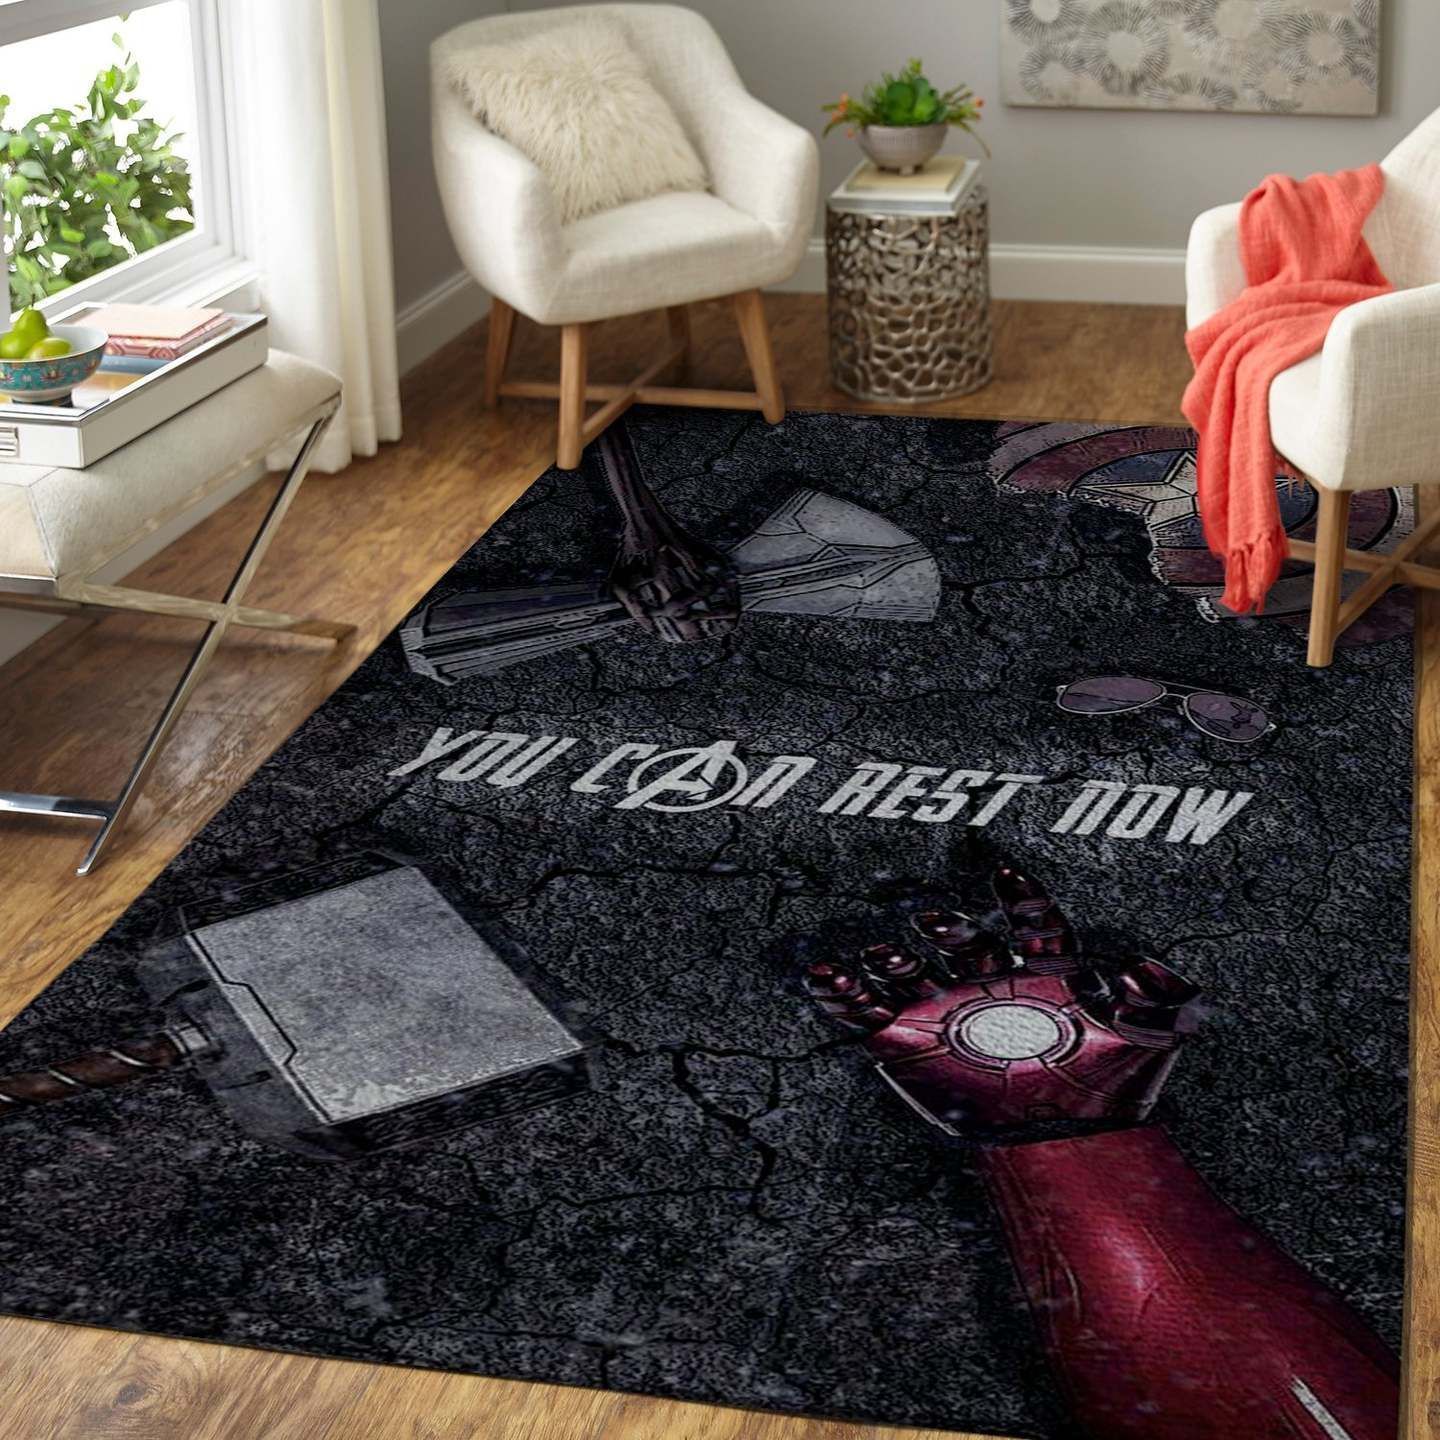 AVENGERS END GAME AREA RUG  YOU CAN REST NOW MARVEL SUPERHERO FLOOR DECOR THE US DECOR 180222